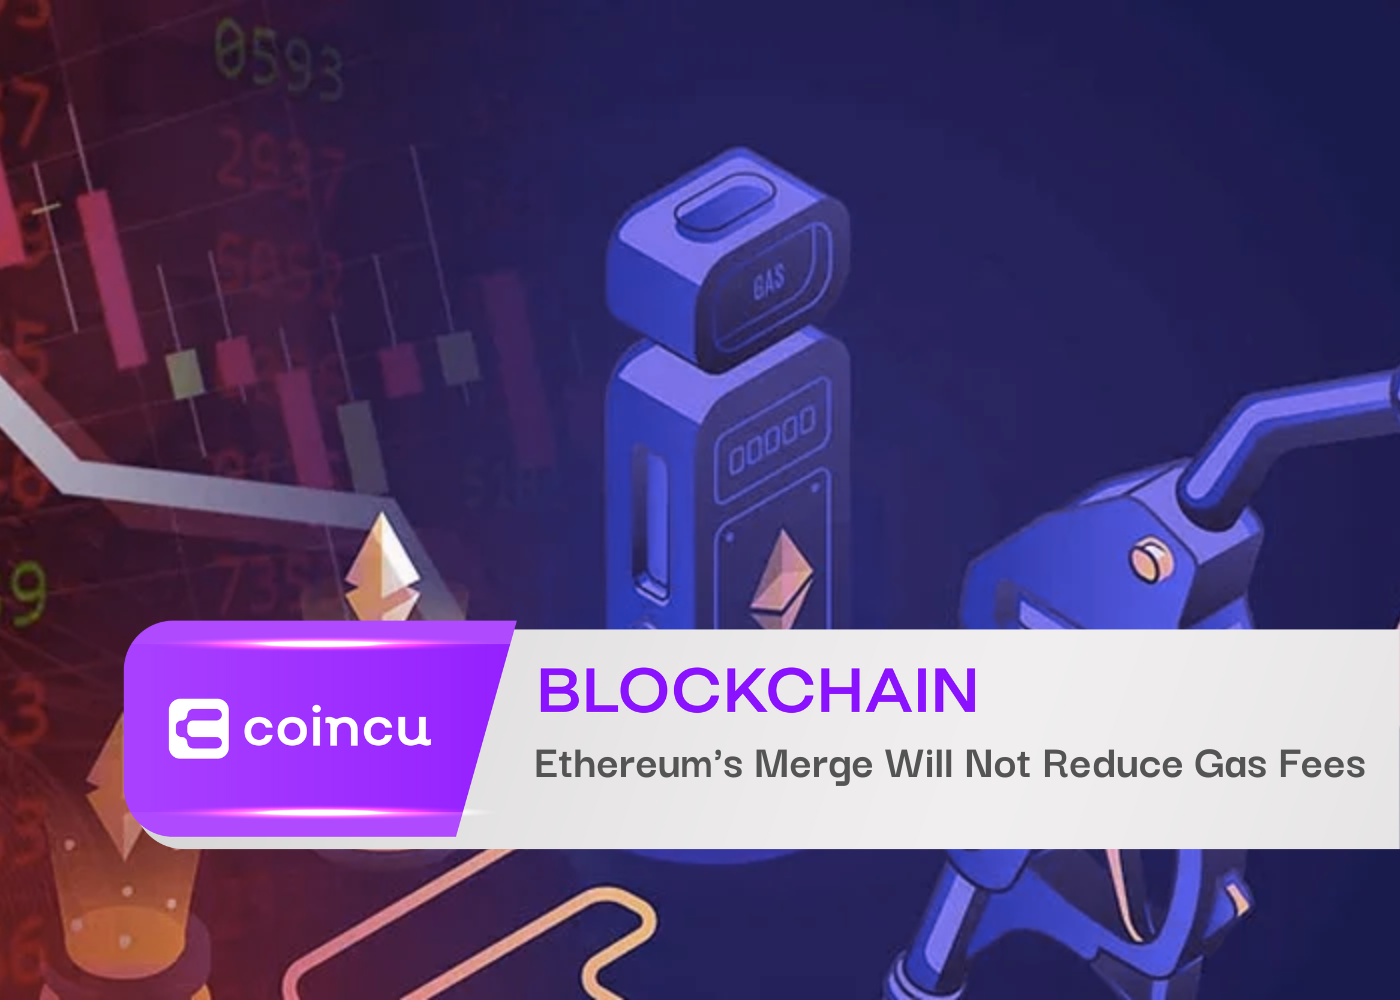 Ethereum's Merge Will Not Reduce Gas Fees